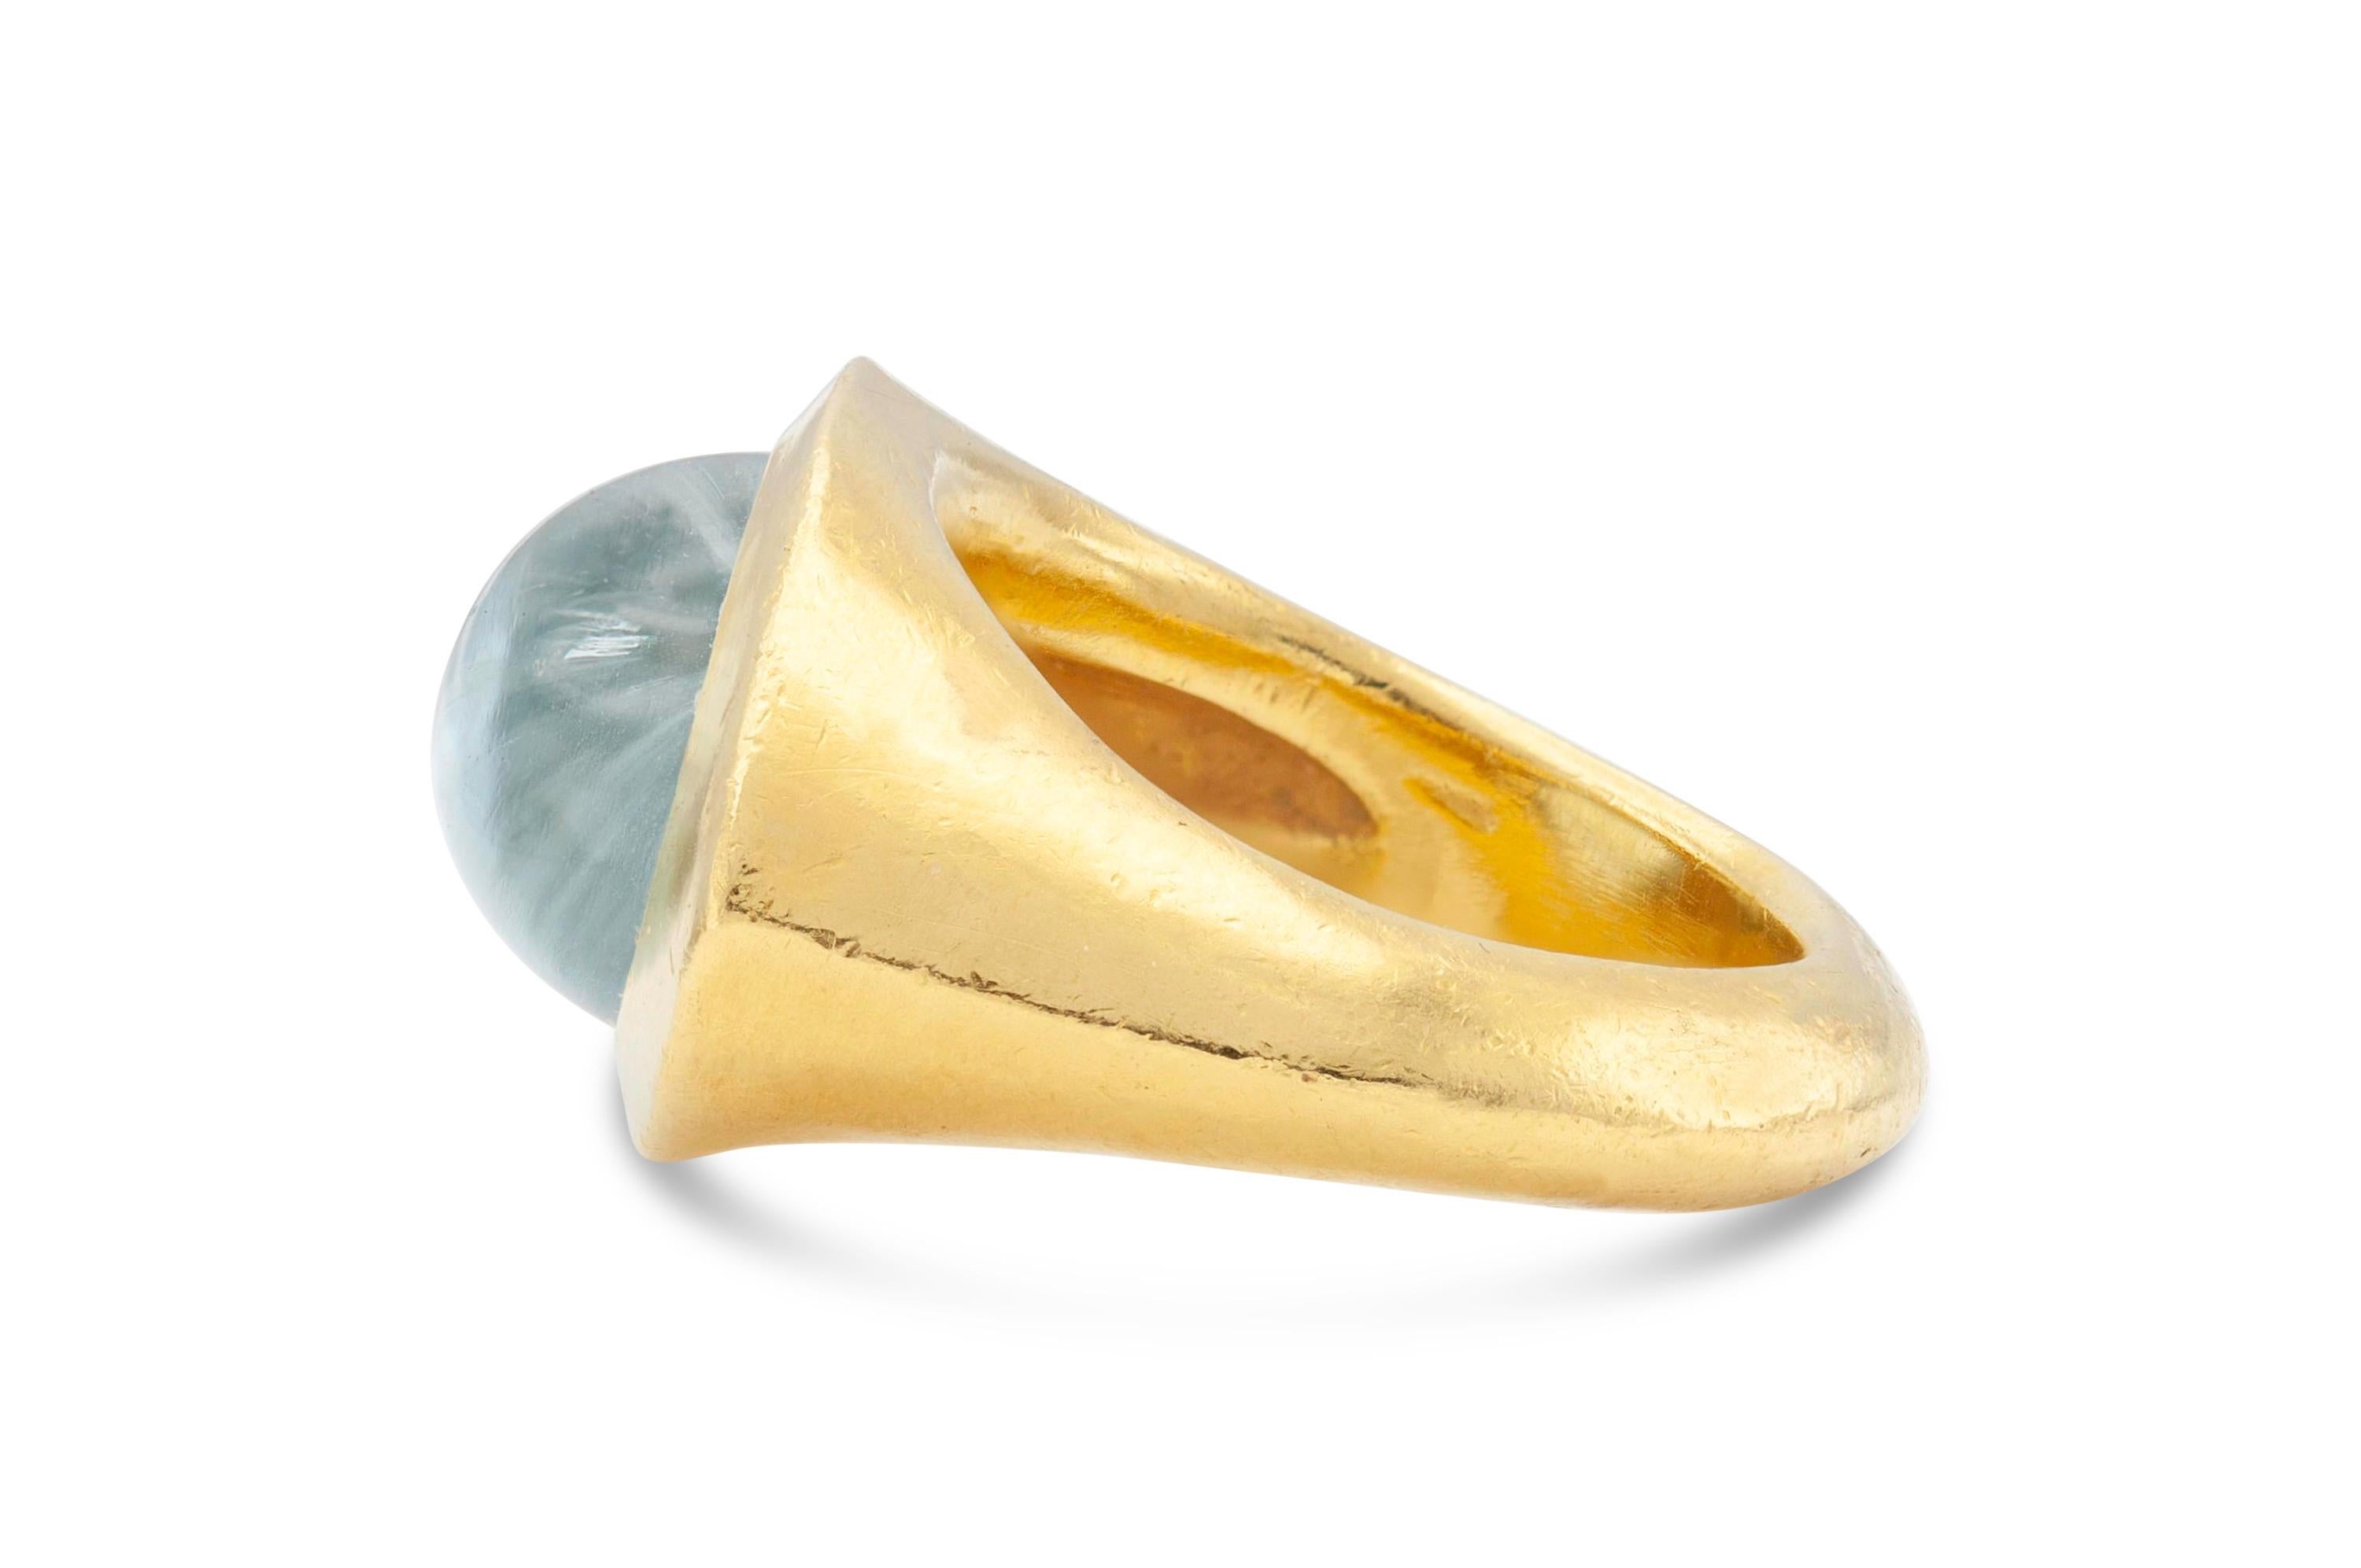 Finely crafted in 22K yellow gold with a cabochon Aquamarine.
Signed by Darlene de Sedle.